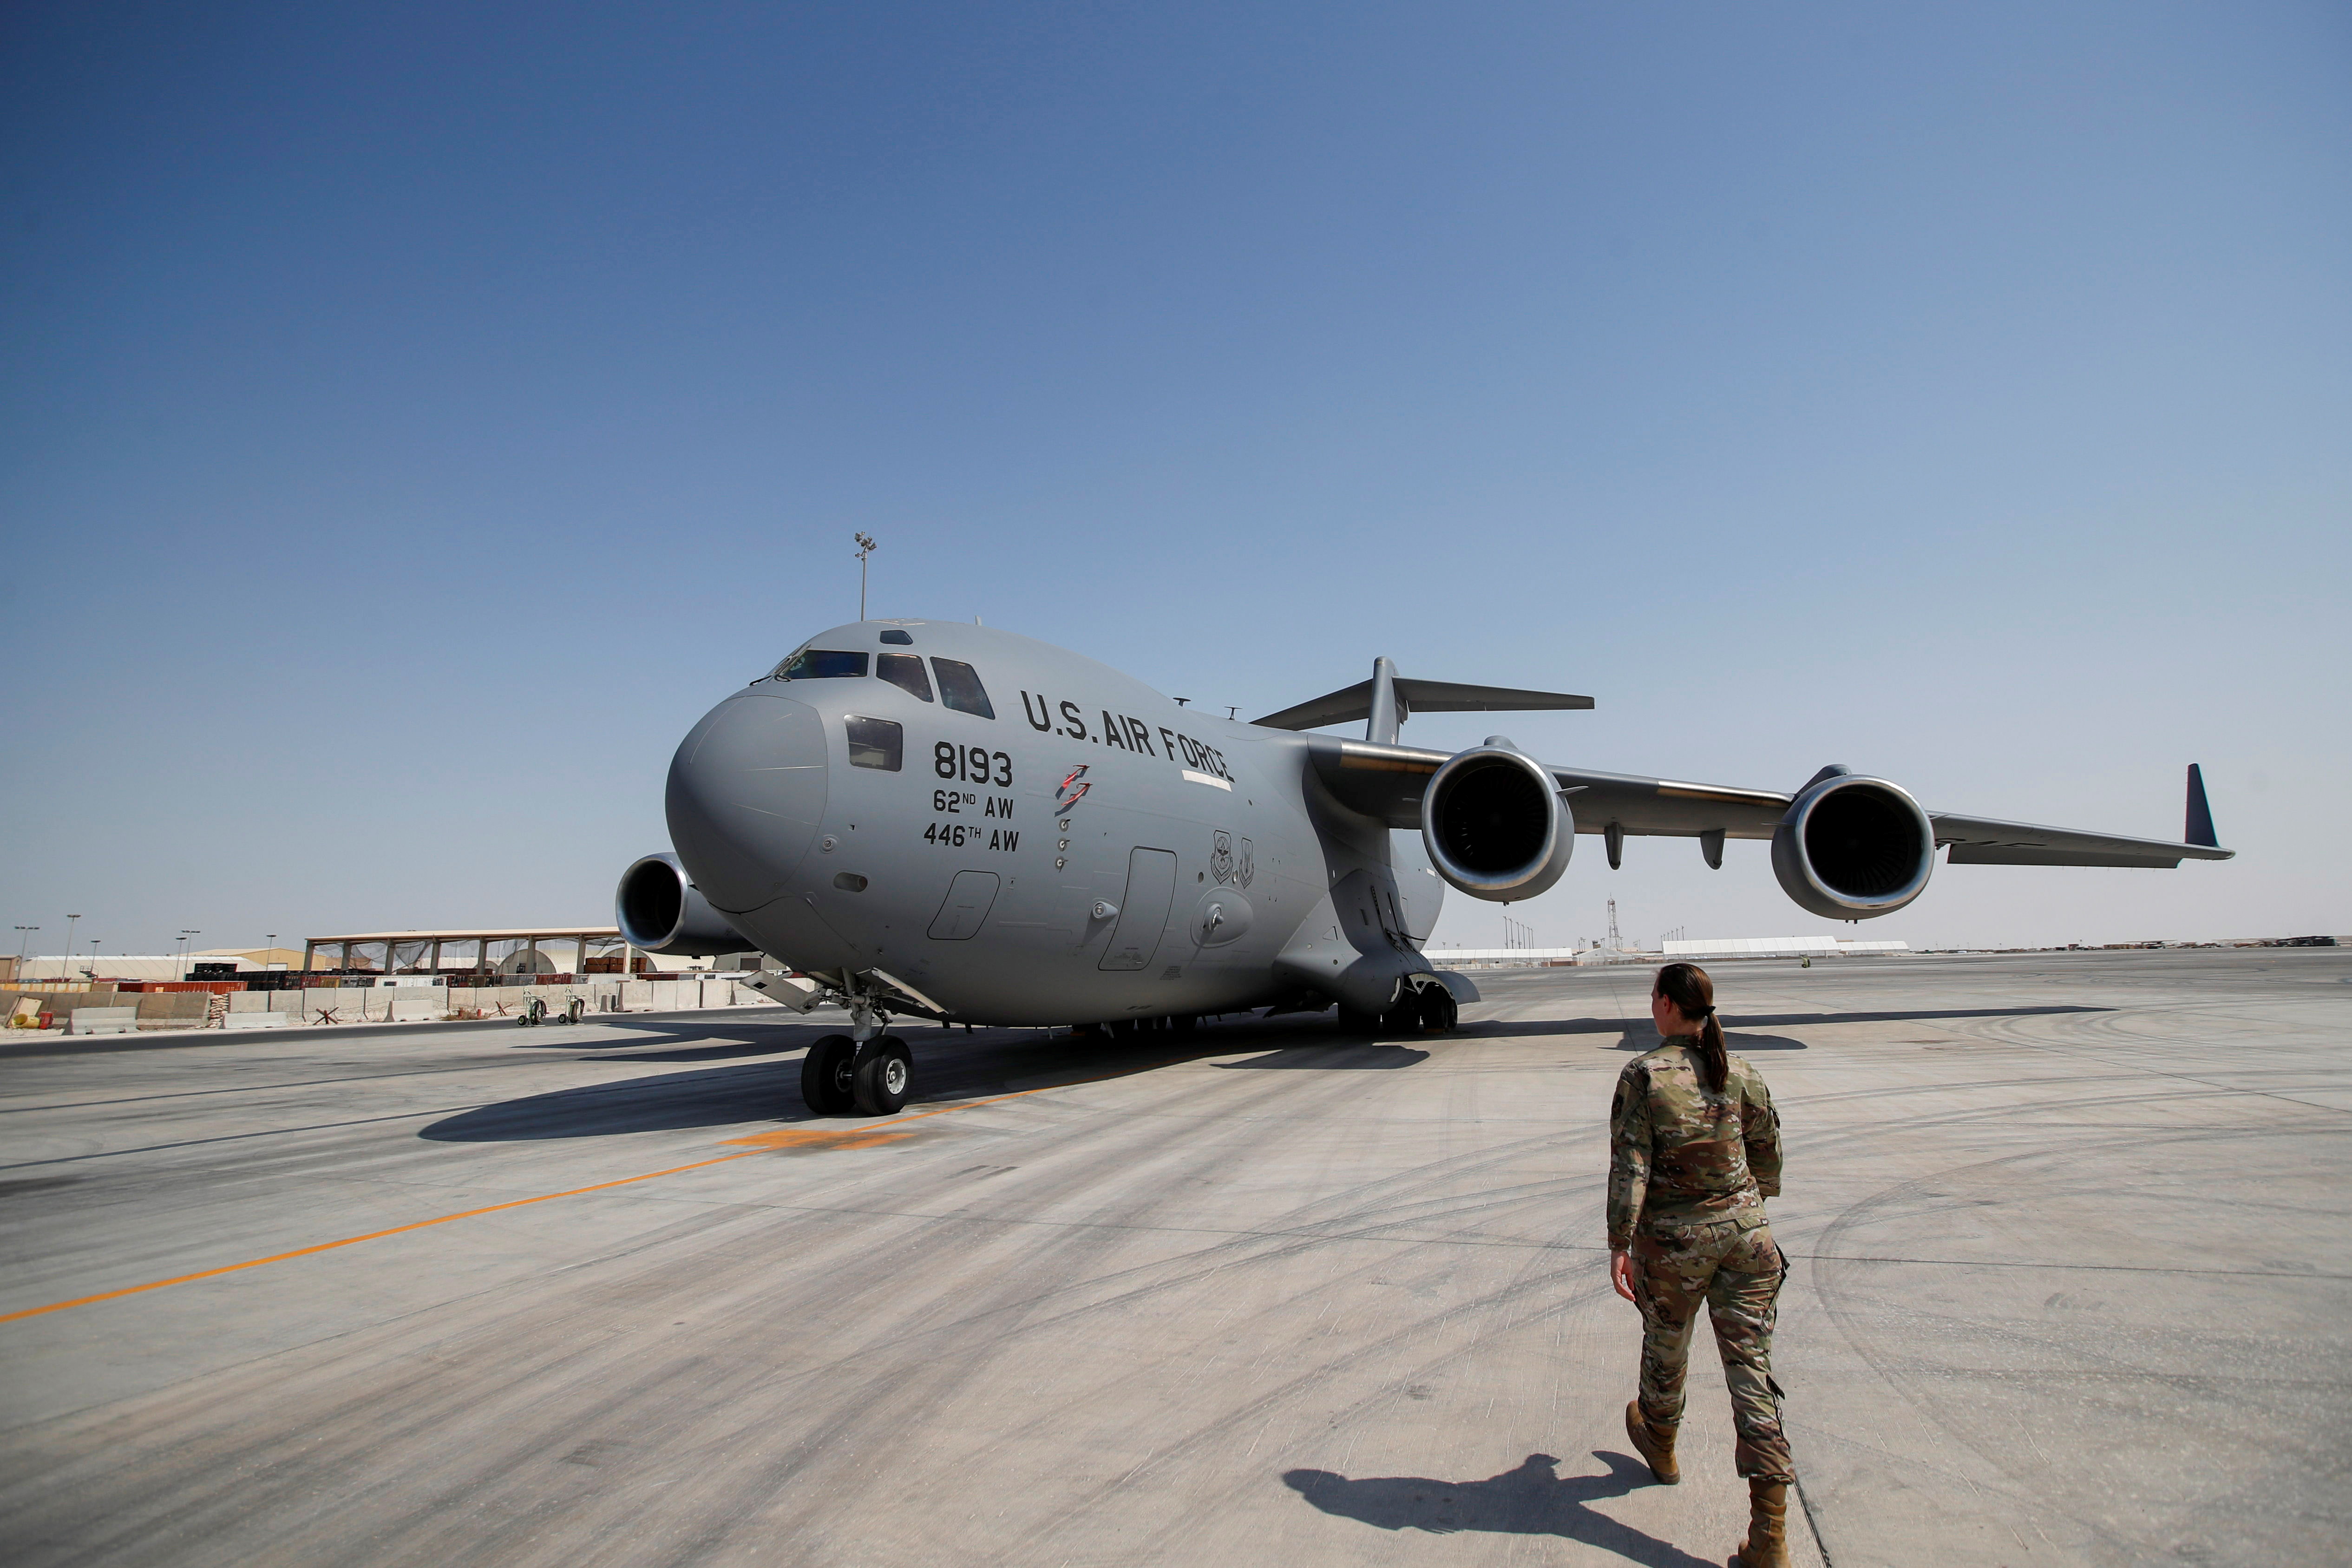 A U.S. military officer walks towards a U.S. Air Force plane at Al Udeid airbase in Doha